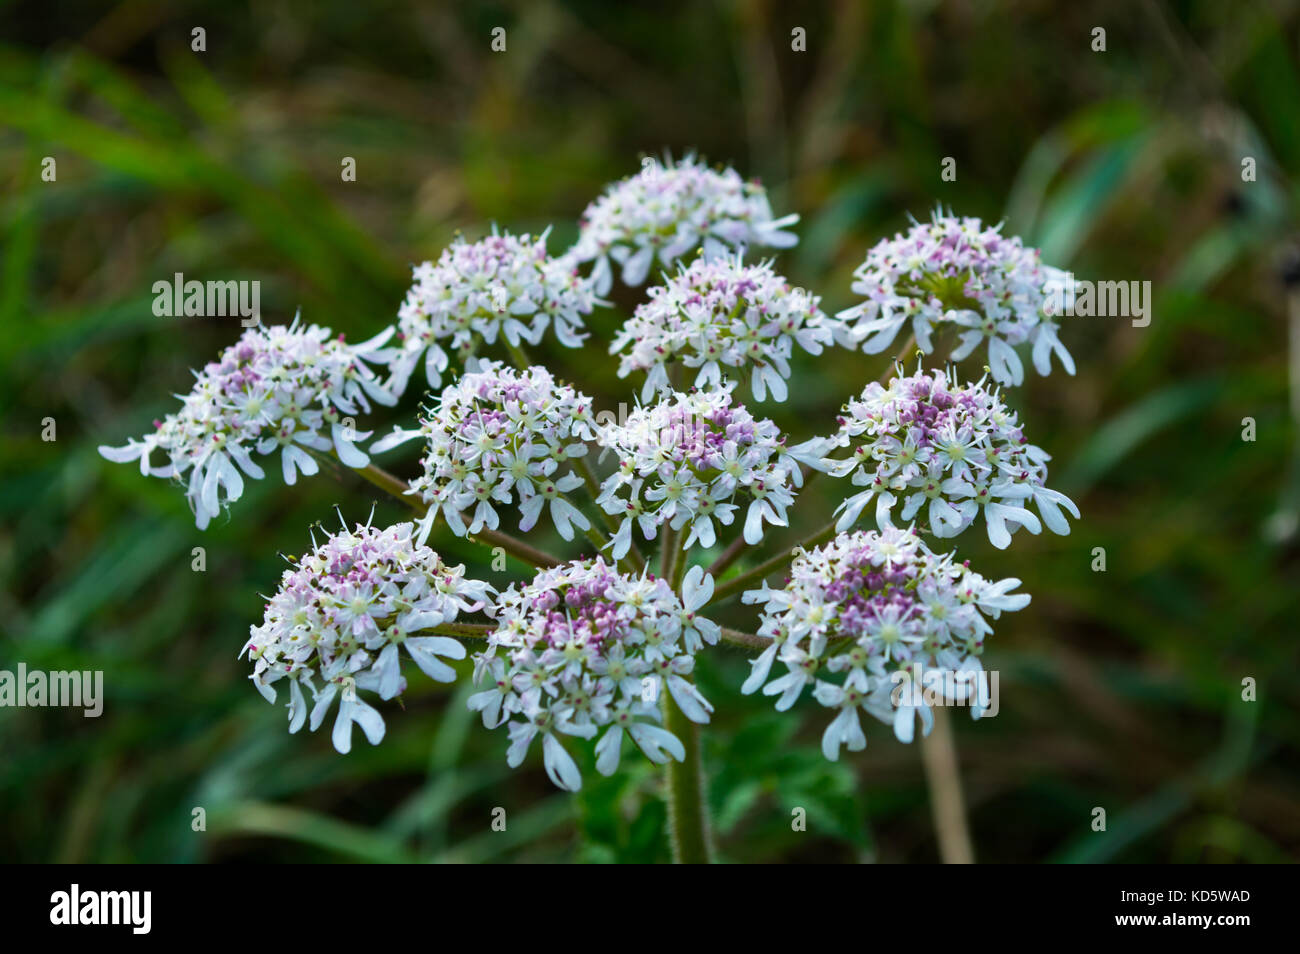 Macro British wild meadow Hemlock flower in full bloom with white and purple flowers in early autumn commonly mistaken for cow parsley or dropwort Stock Photo